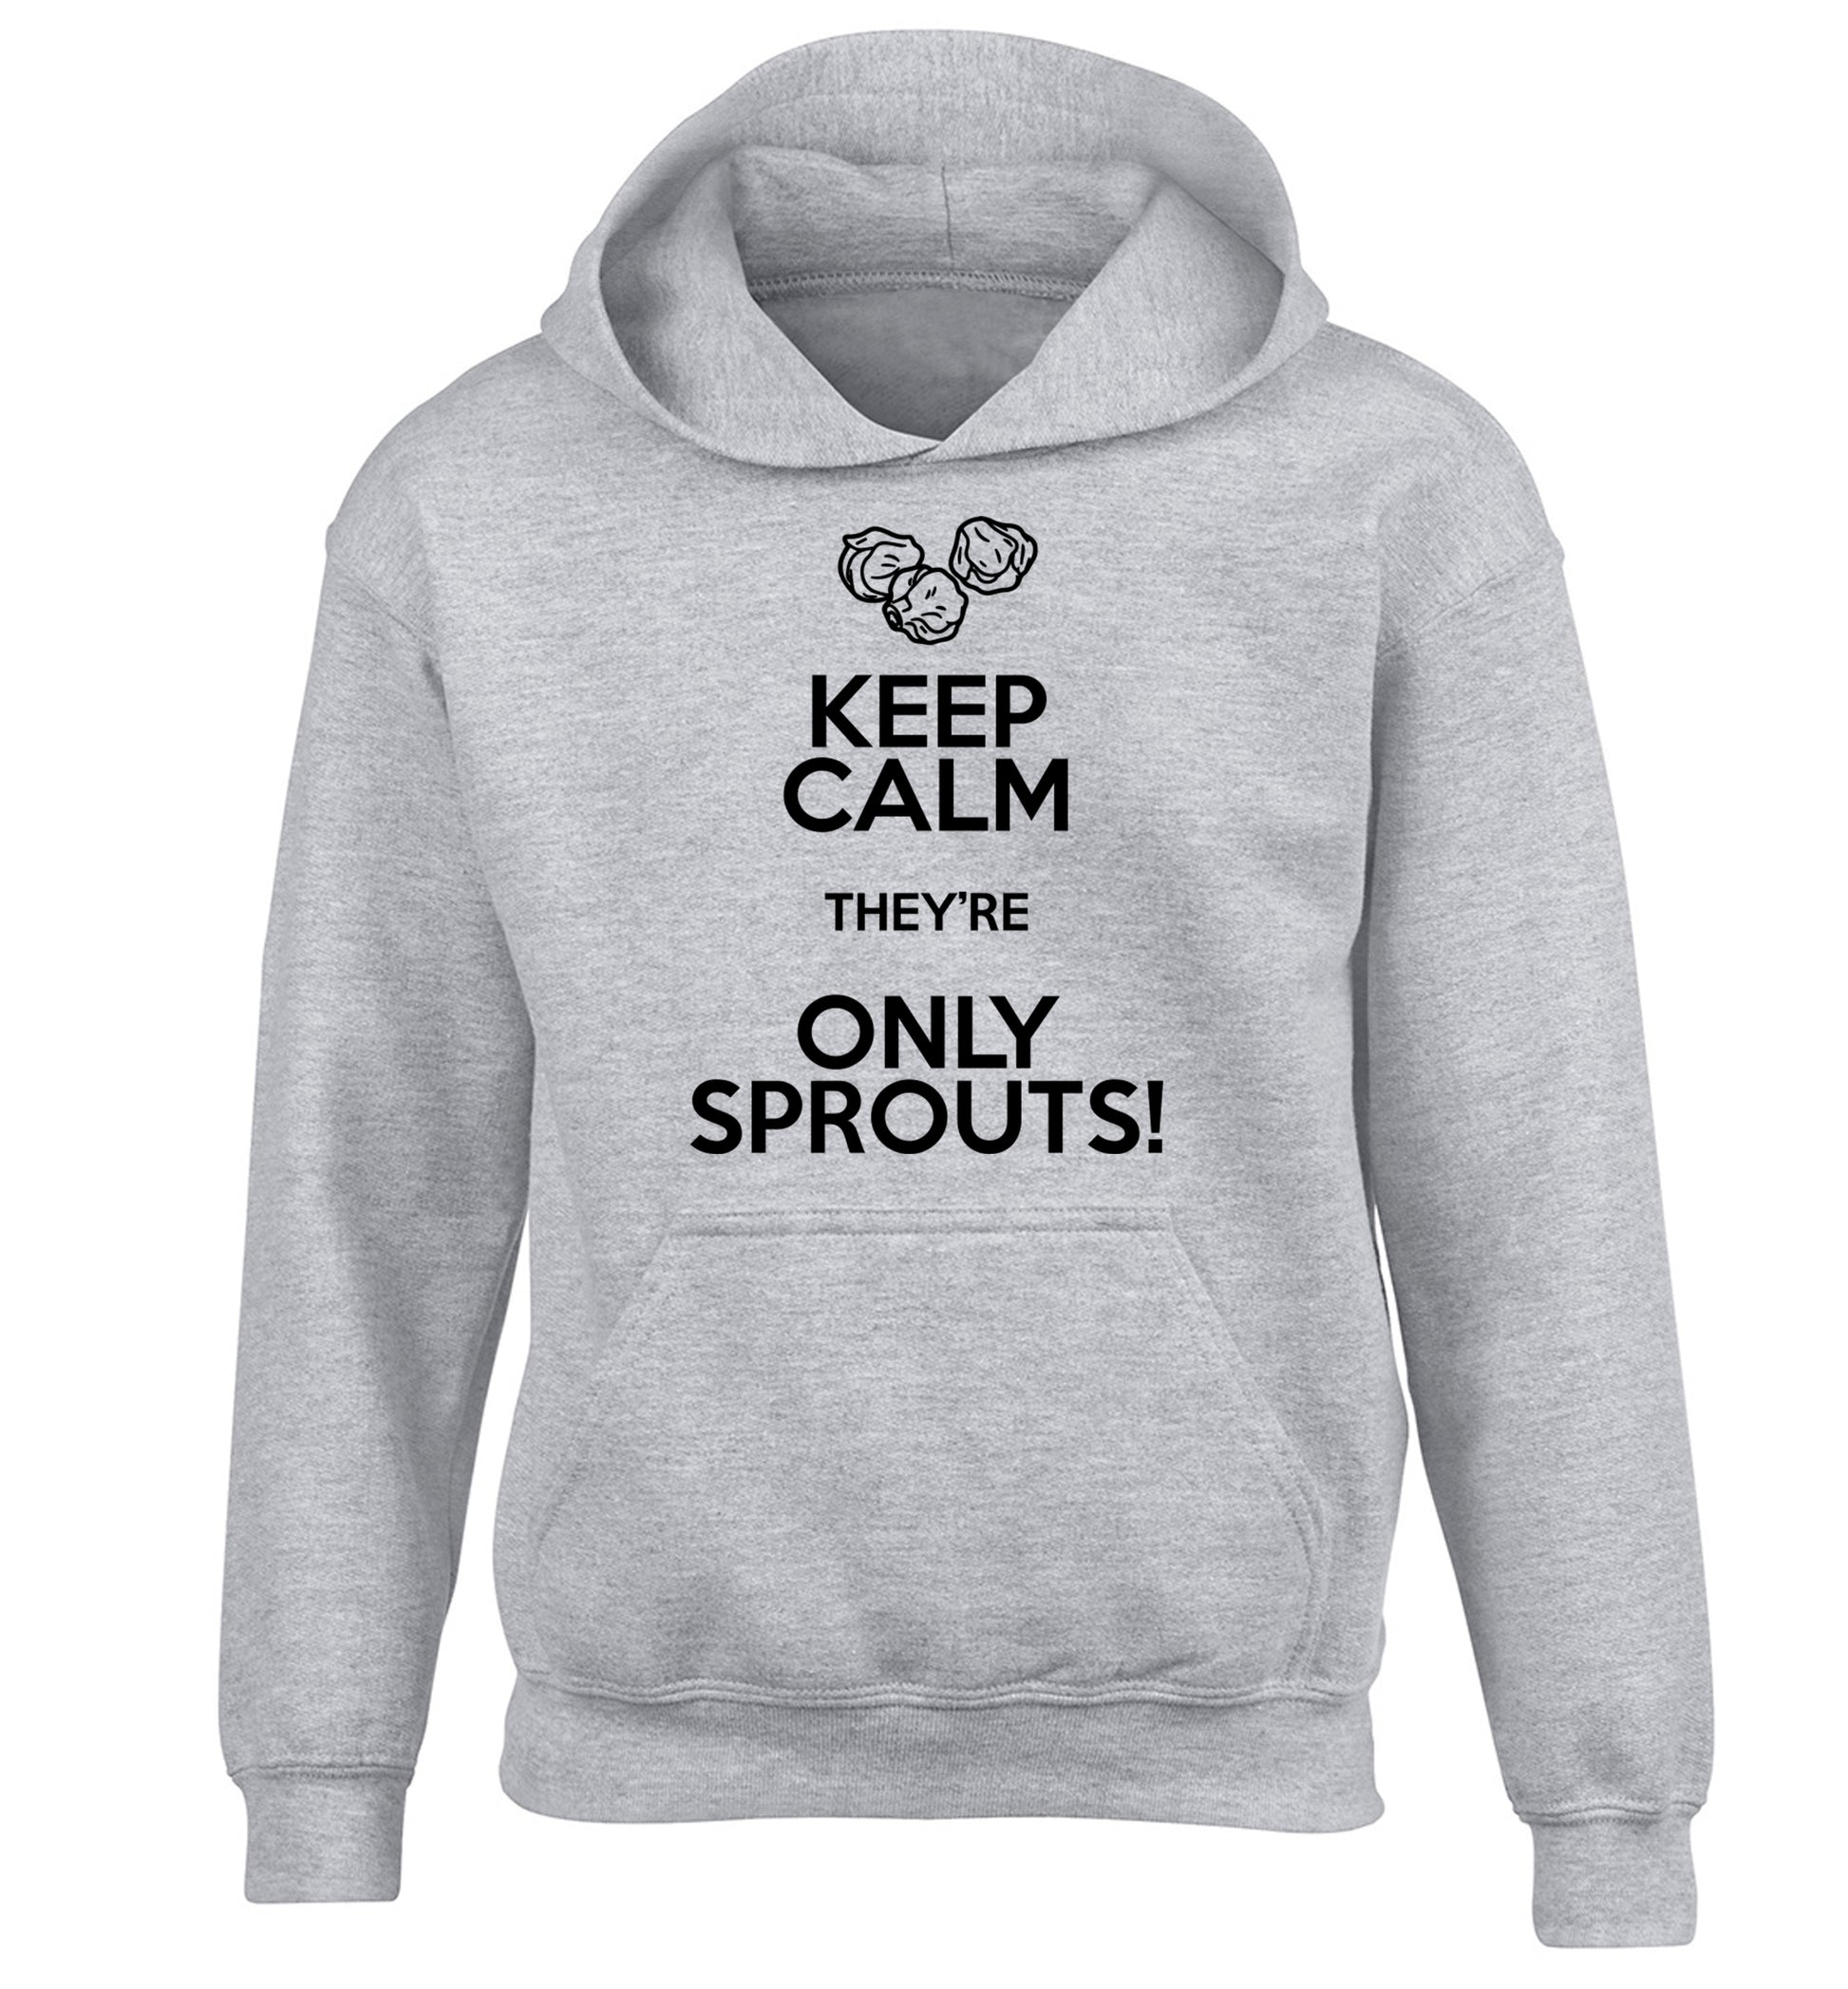 Keep calm they're only sprouts children's grey hoodie 12-13 Years